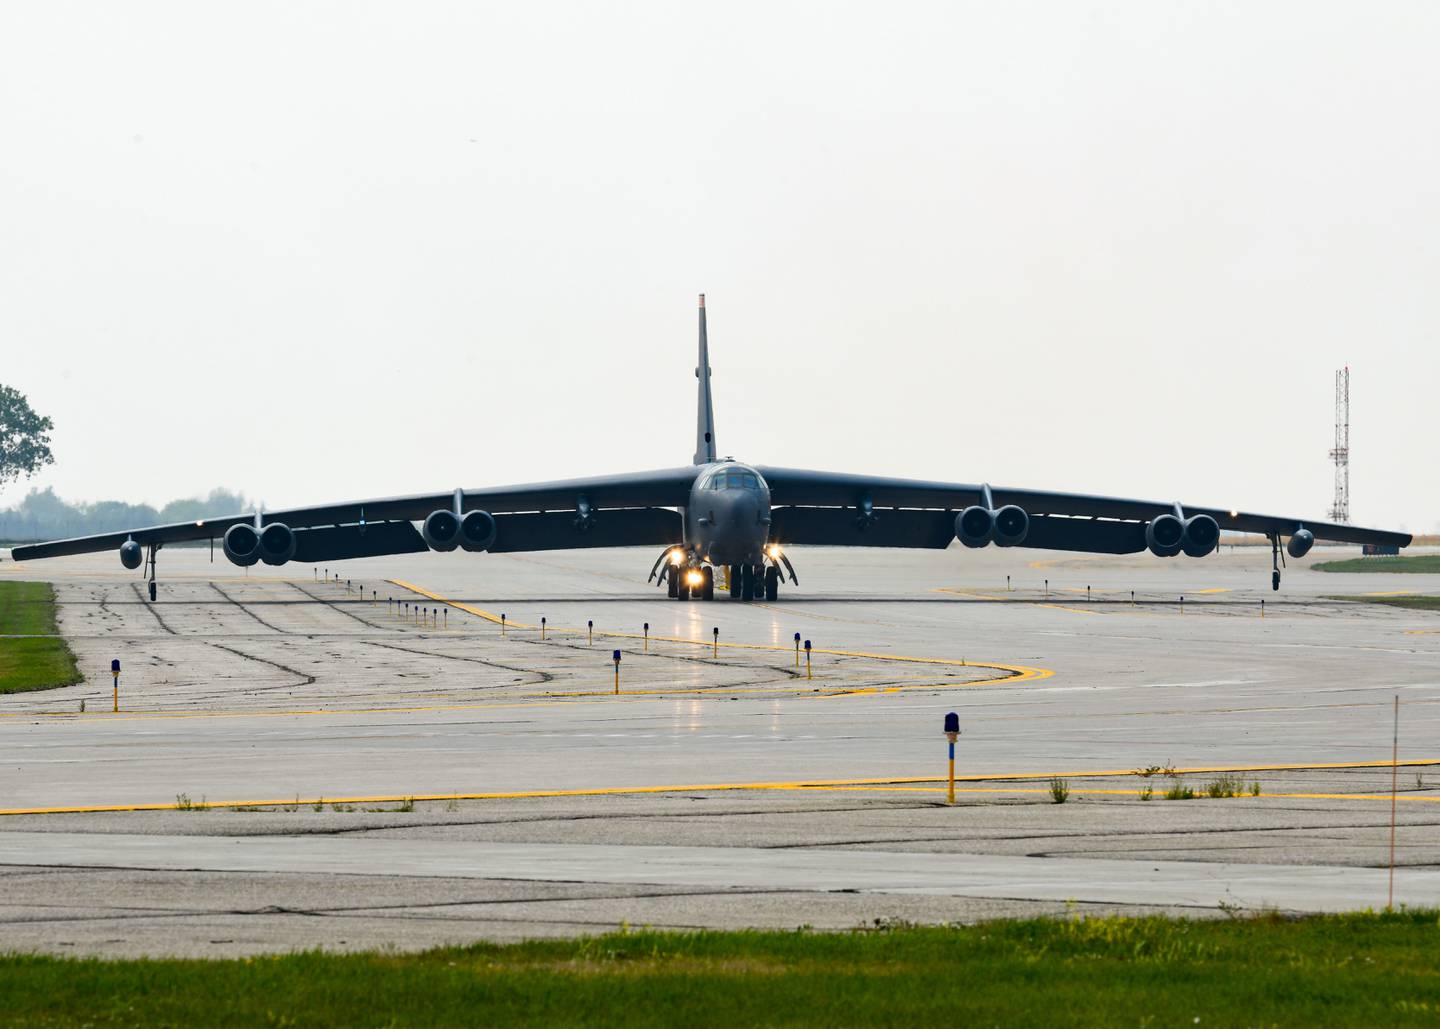 A B-52 Stratofortress arrives at Minot Air Force Base, North Dakota, from Qatar, Sept. 10, 2021. The two aircrews that returned were from the 23rd Bomb Squadron at Minot. (Airman 1st Class Saomy Sabournin/Air Force)